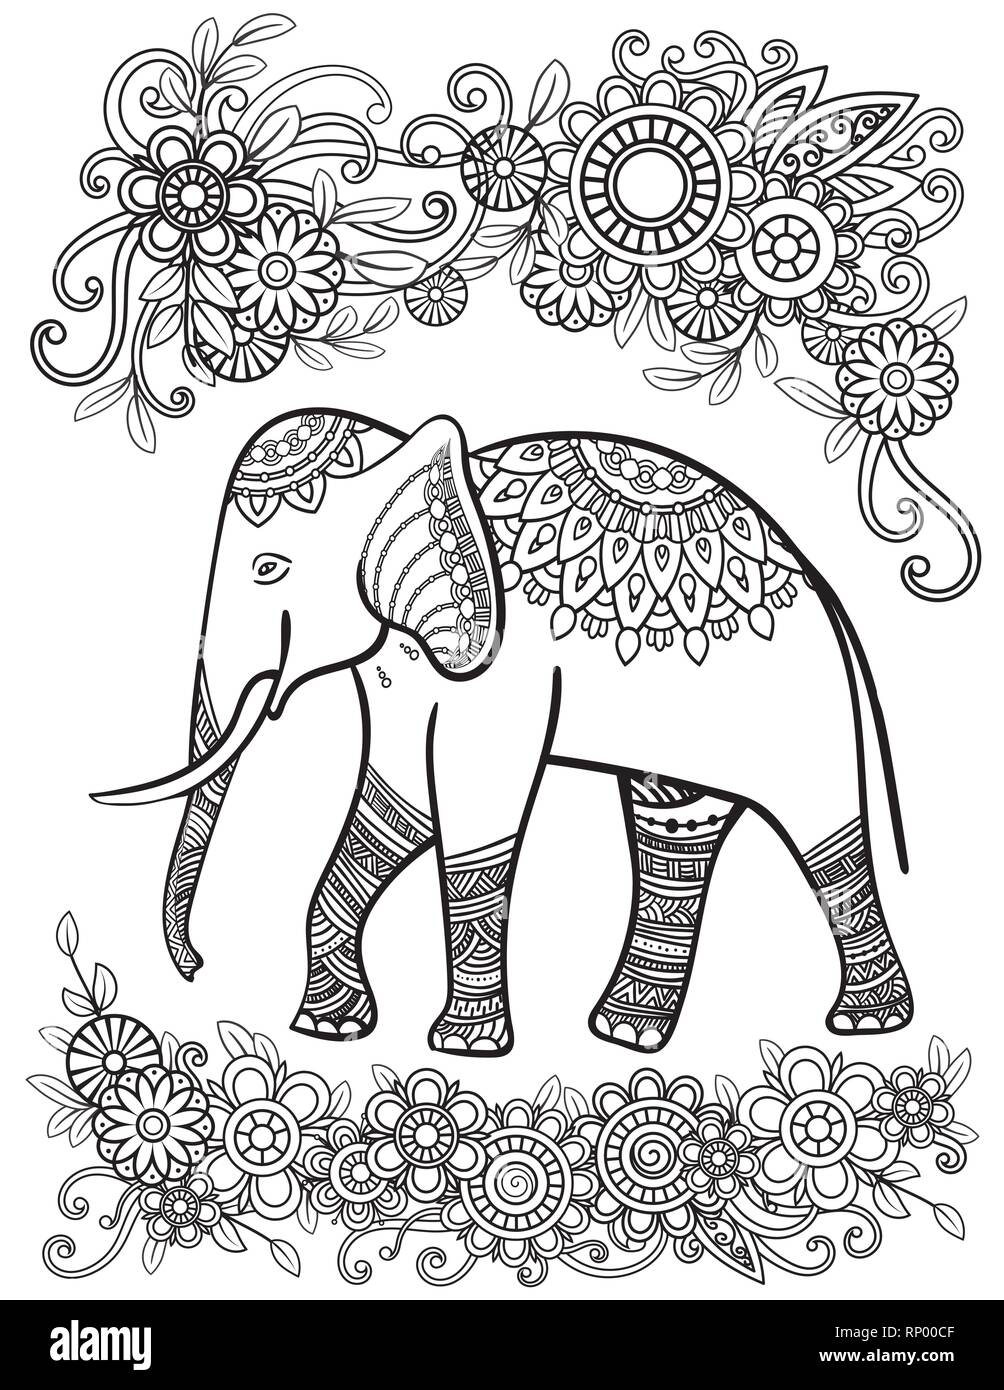 Ethnic elephant line art vector illustration oriental pattern with flowers and mandalas hand drawn vector illustration coloring page for adult coloring book stock vector image art